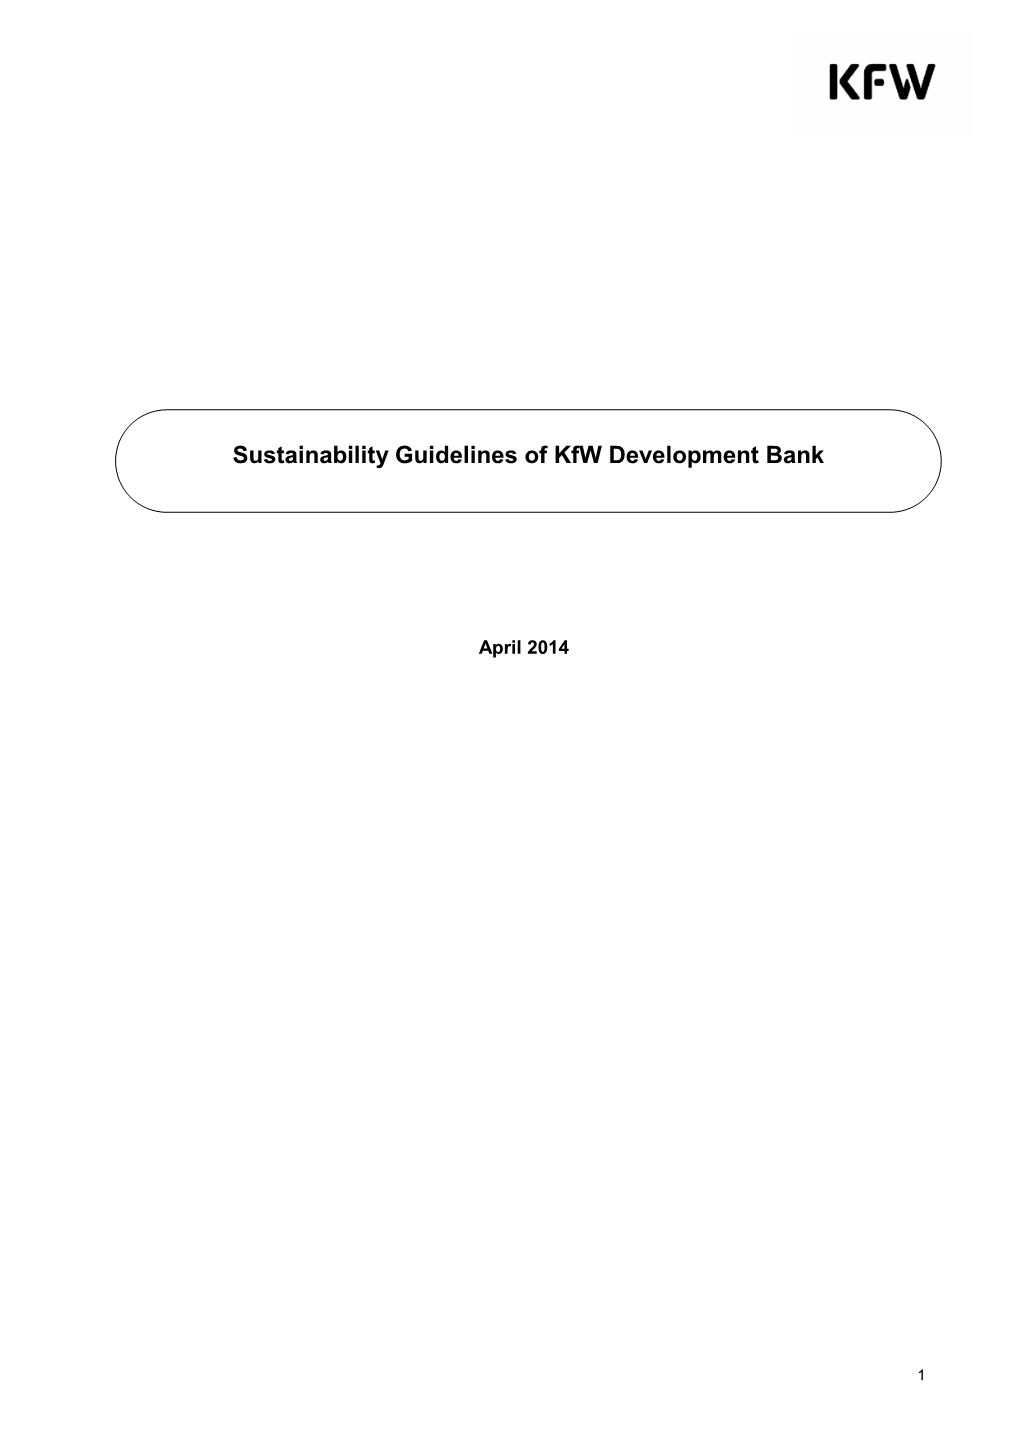 Sustainability Guidelines of Kfw Development Bank